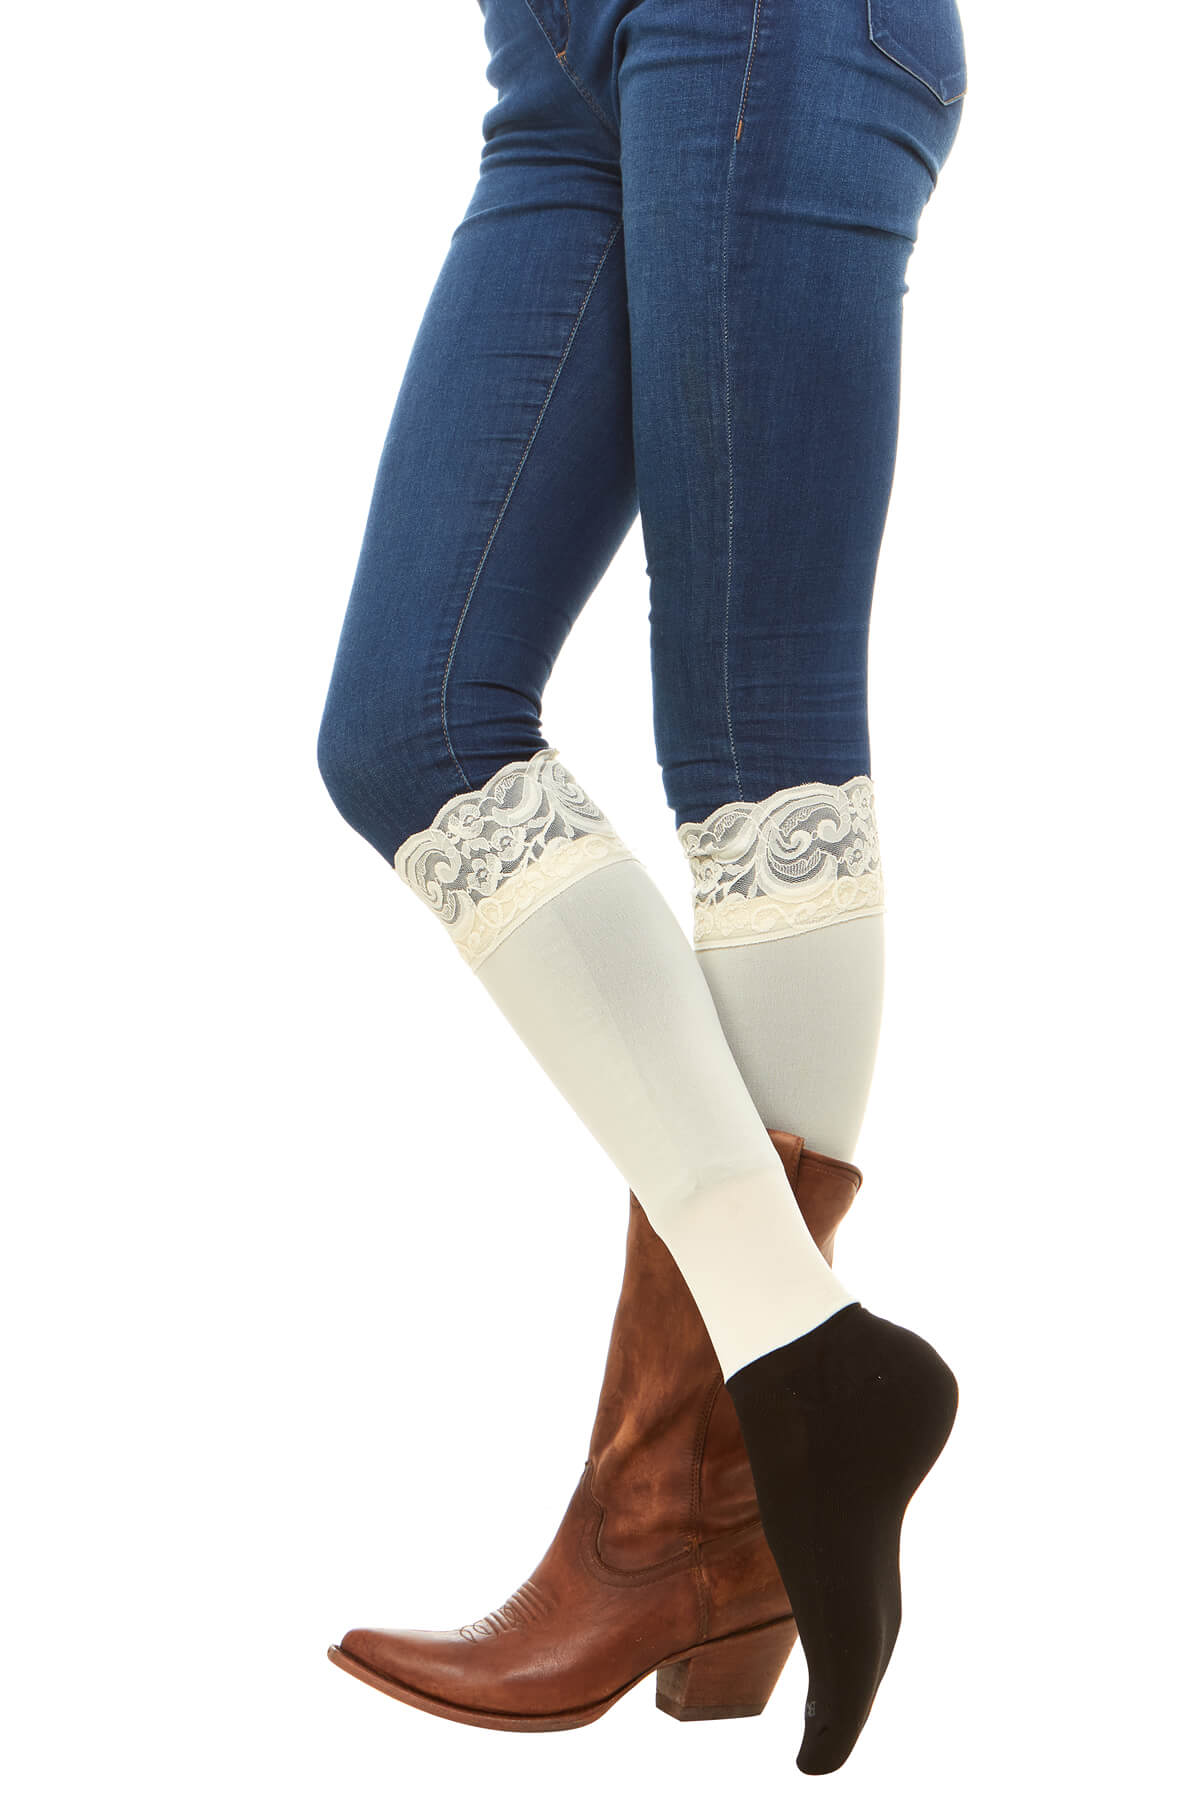 Sleek Compression sock design with lace cuff detail. Perfect for rainboots and cowboy boots.Sleek Compression sock design with lace cuff detail with attached performance athletic sock . Perfect for rain boots and cowboy boots.